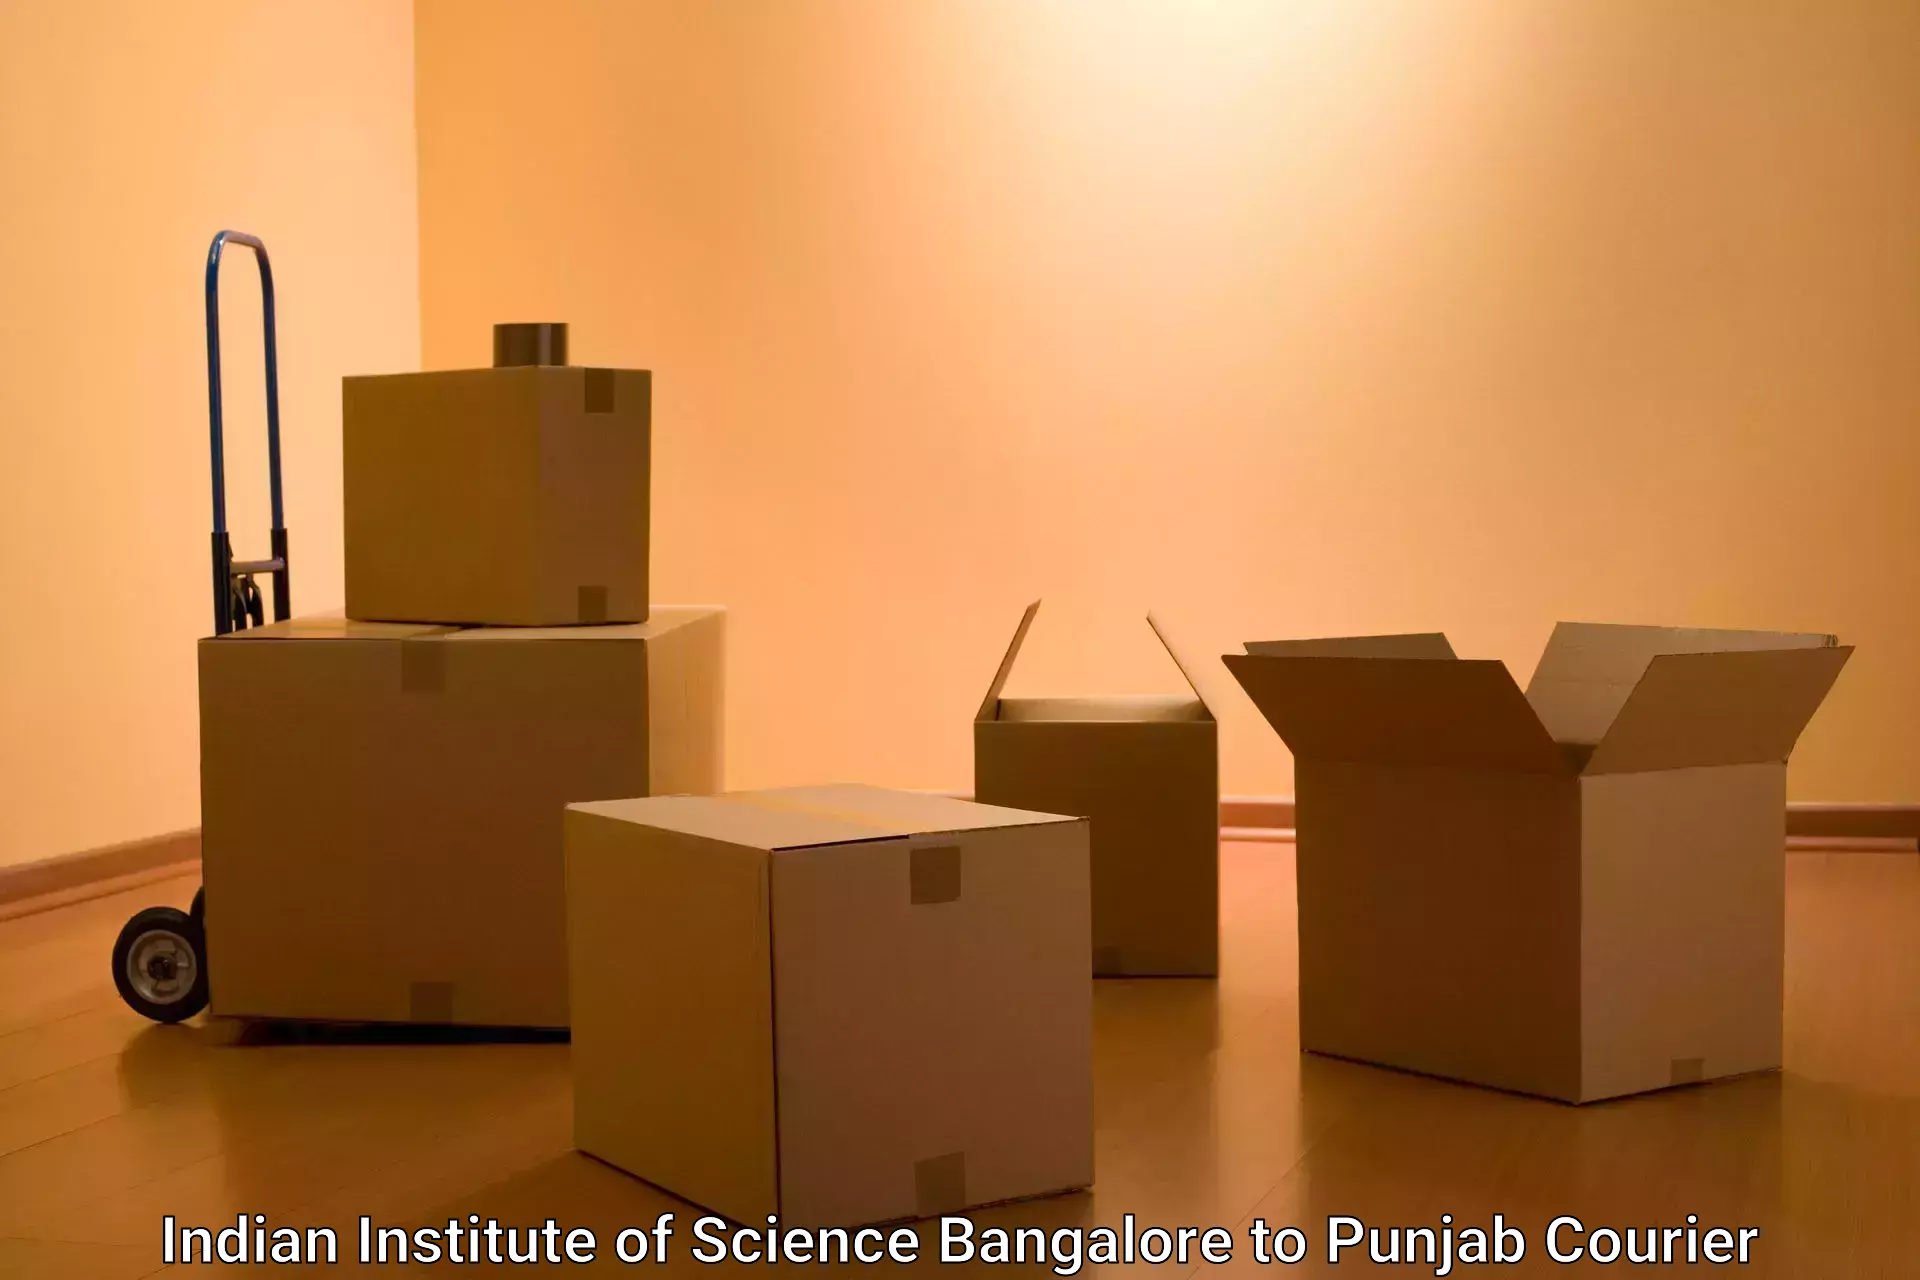 Courier service efficiency Indian Institute of Science Bangalore to Punjab